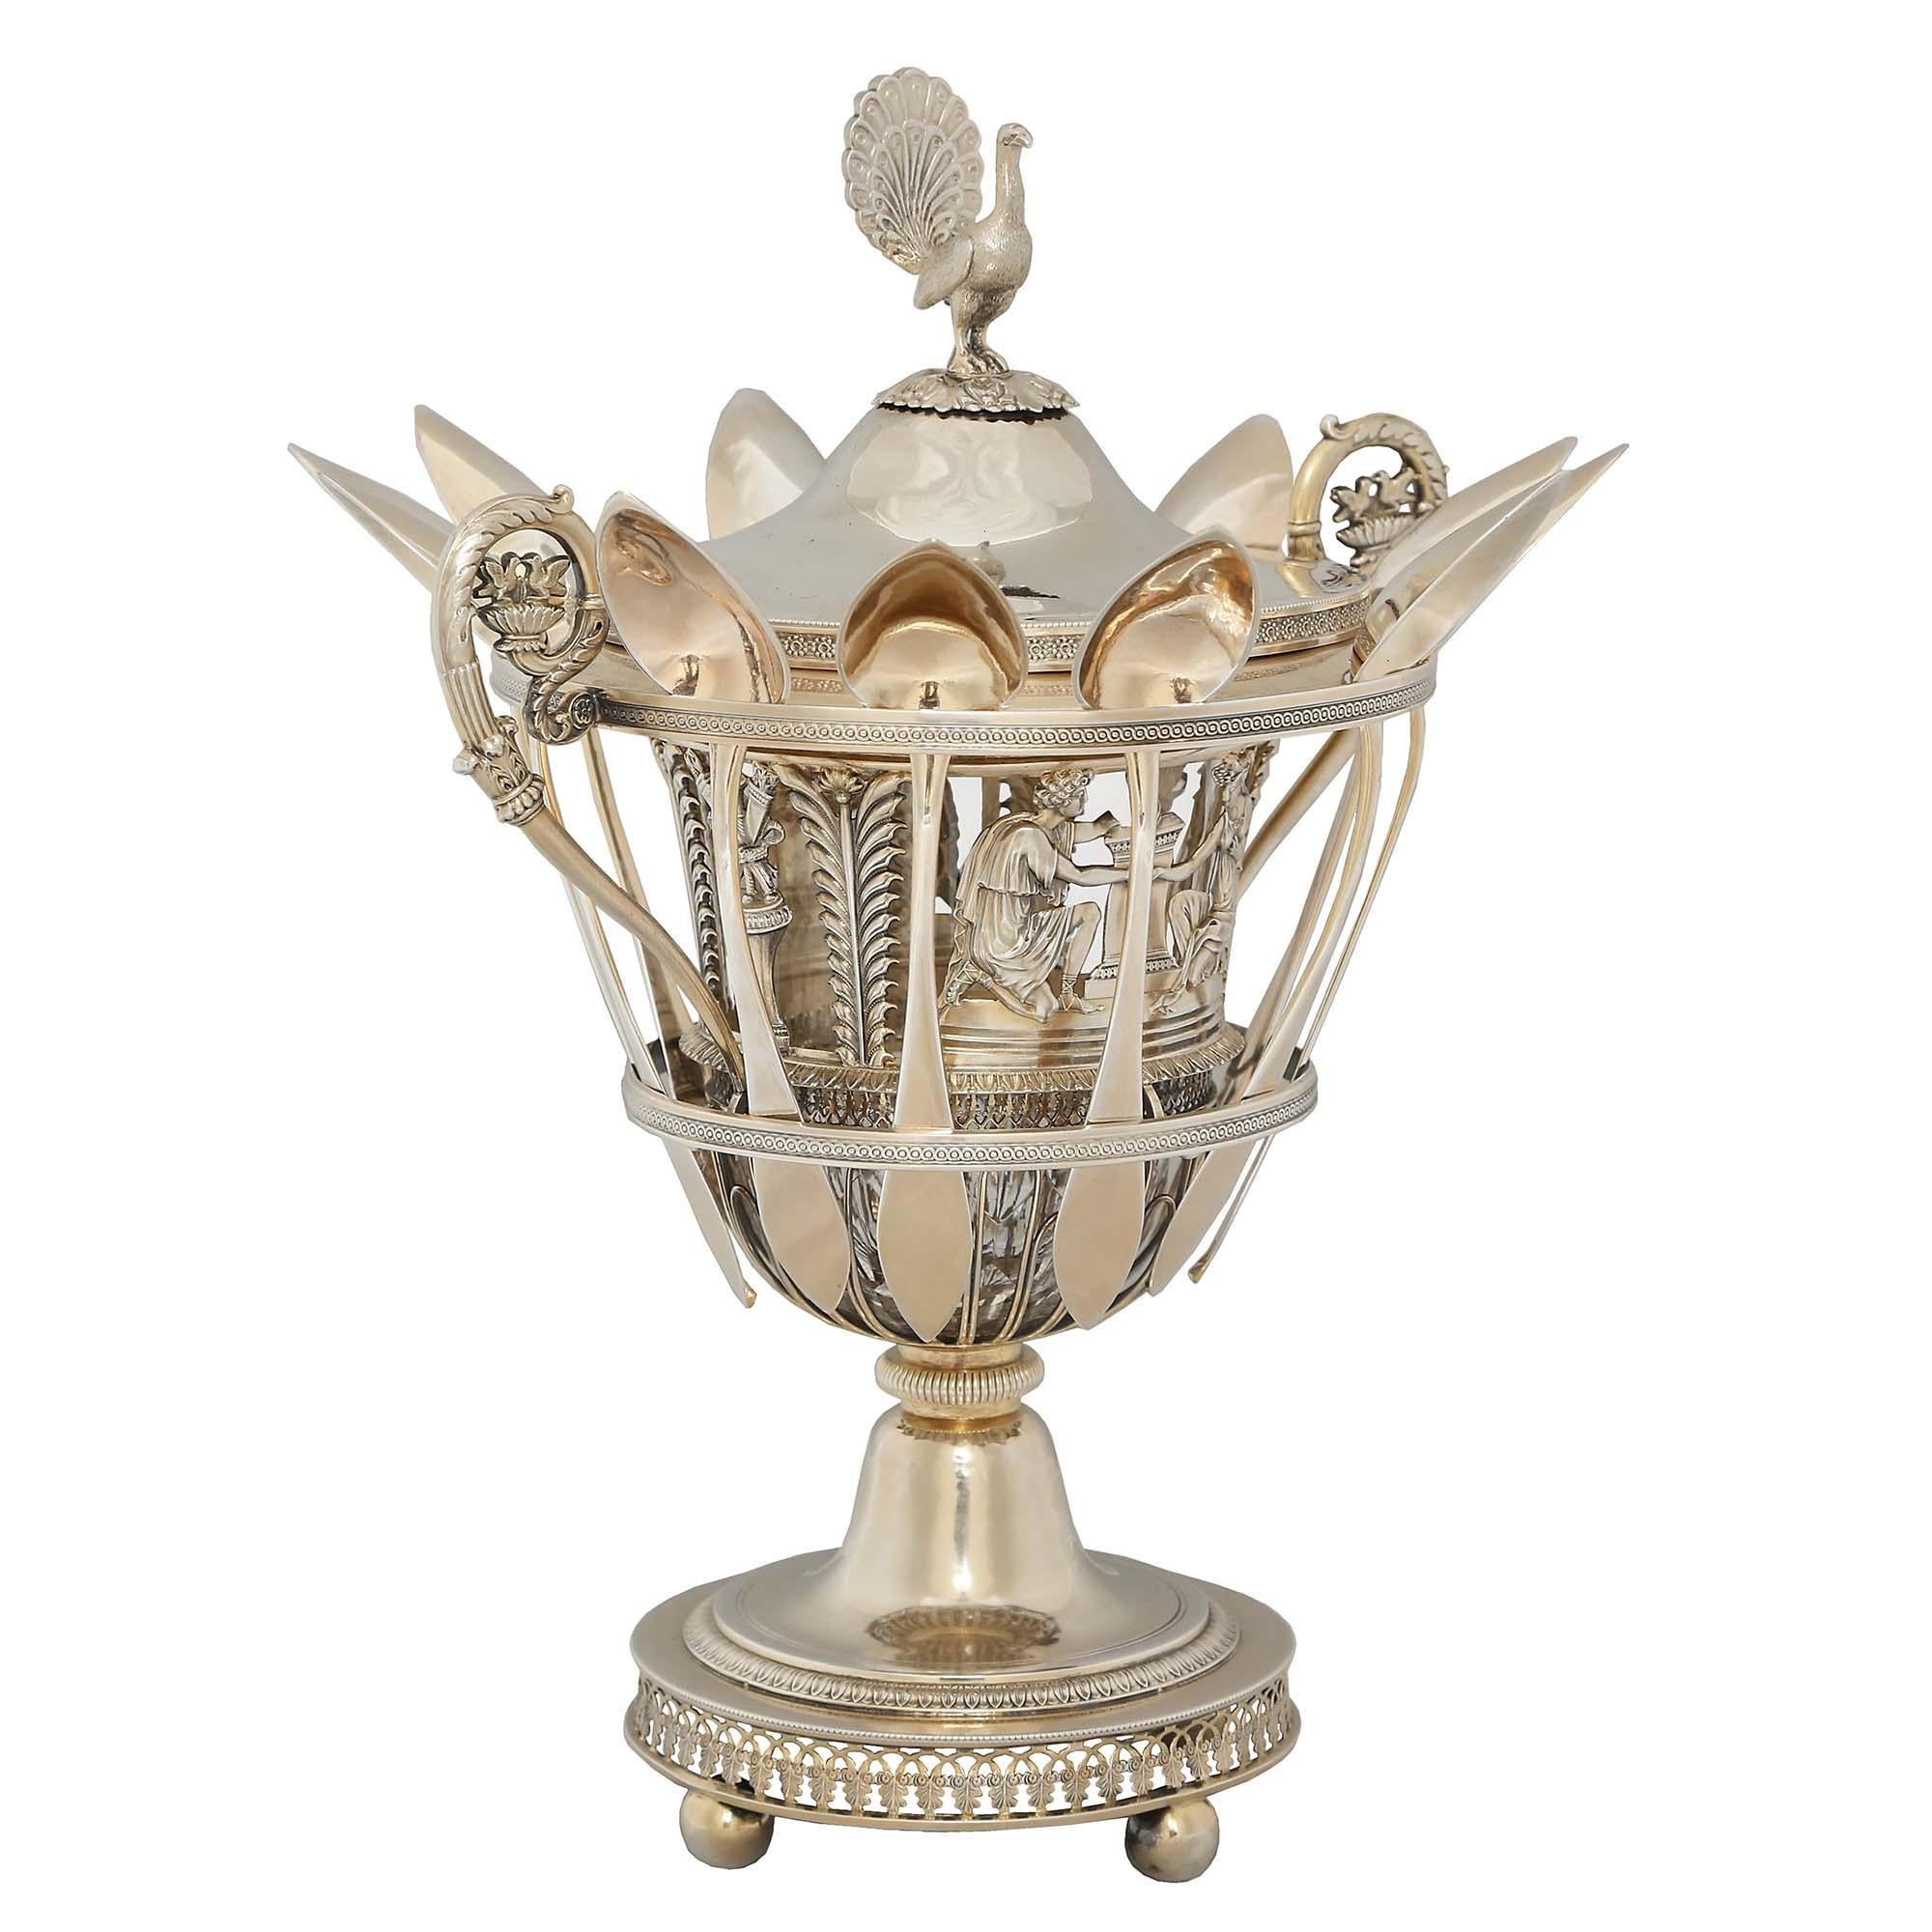 A French 19th century Empire st. sterling silver caviar server. This ornate server is raised on a round base with a pierced foliate pattern. Richly chased male and female figures in garments of the day alternating with the flame of eternity between